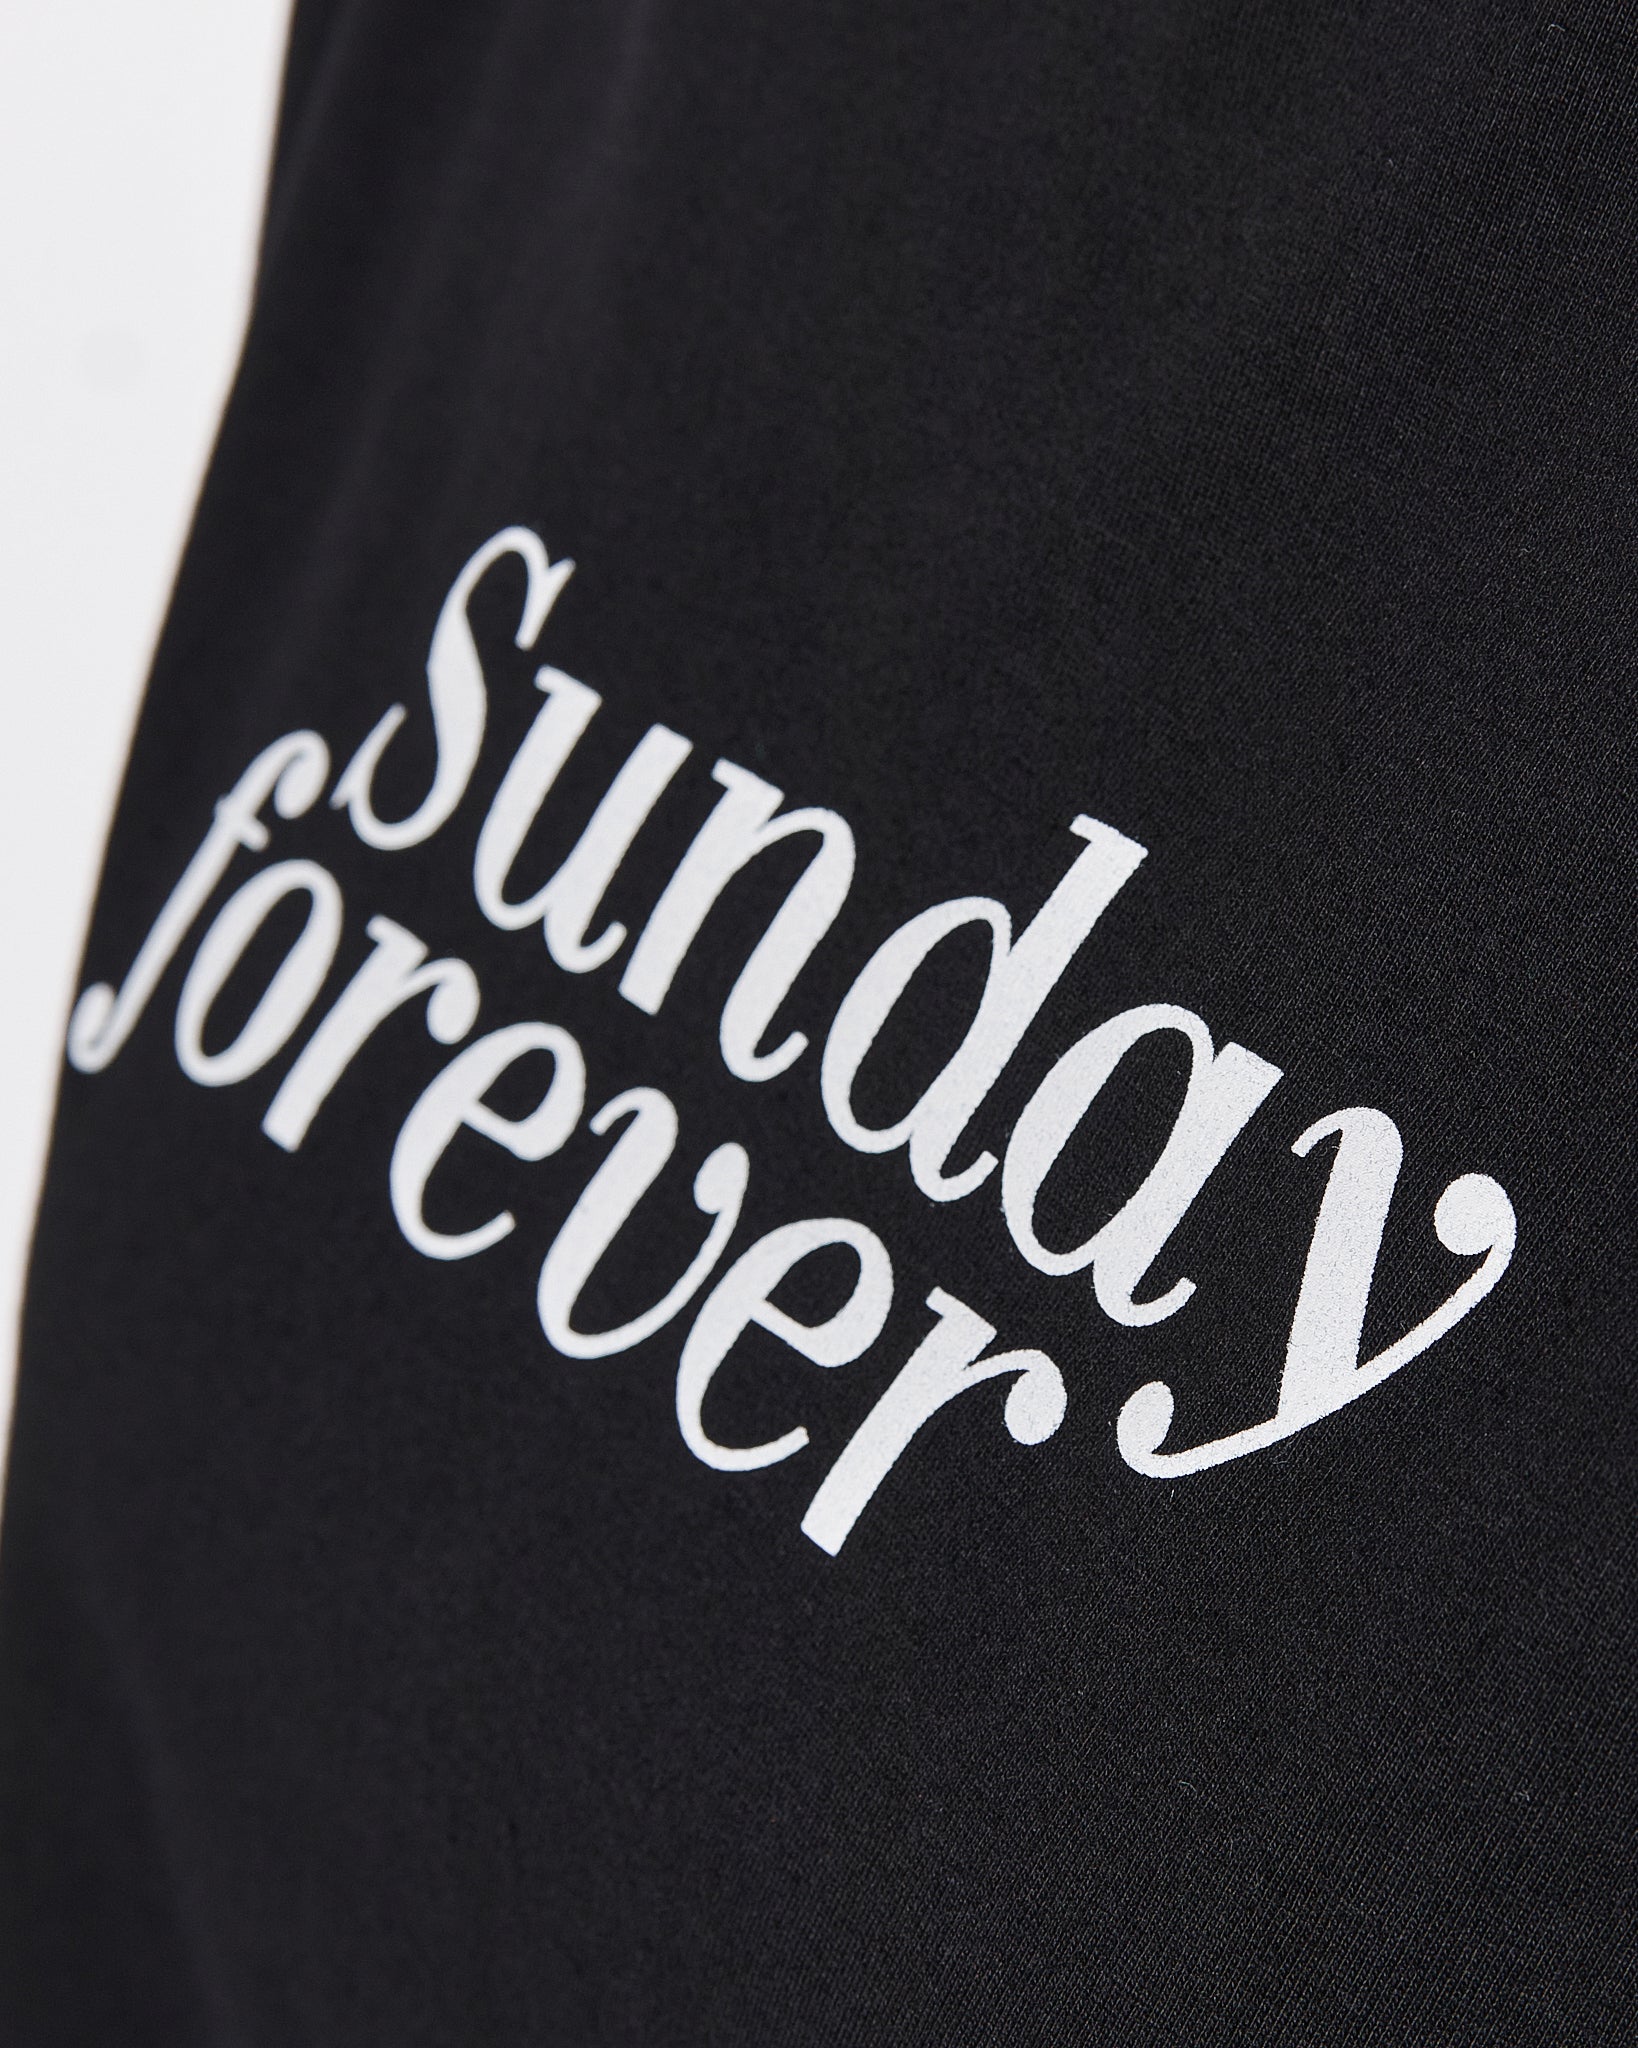 Sunday Forever Lady Black T-Shirt Crop Top 9.90